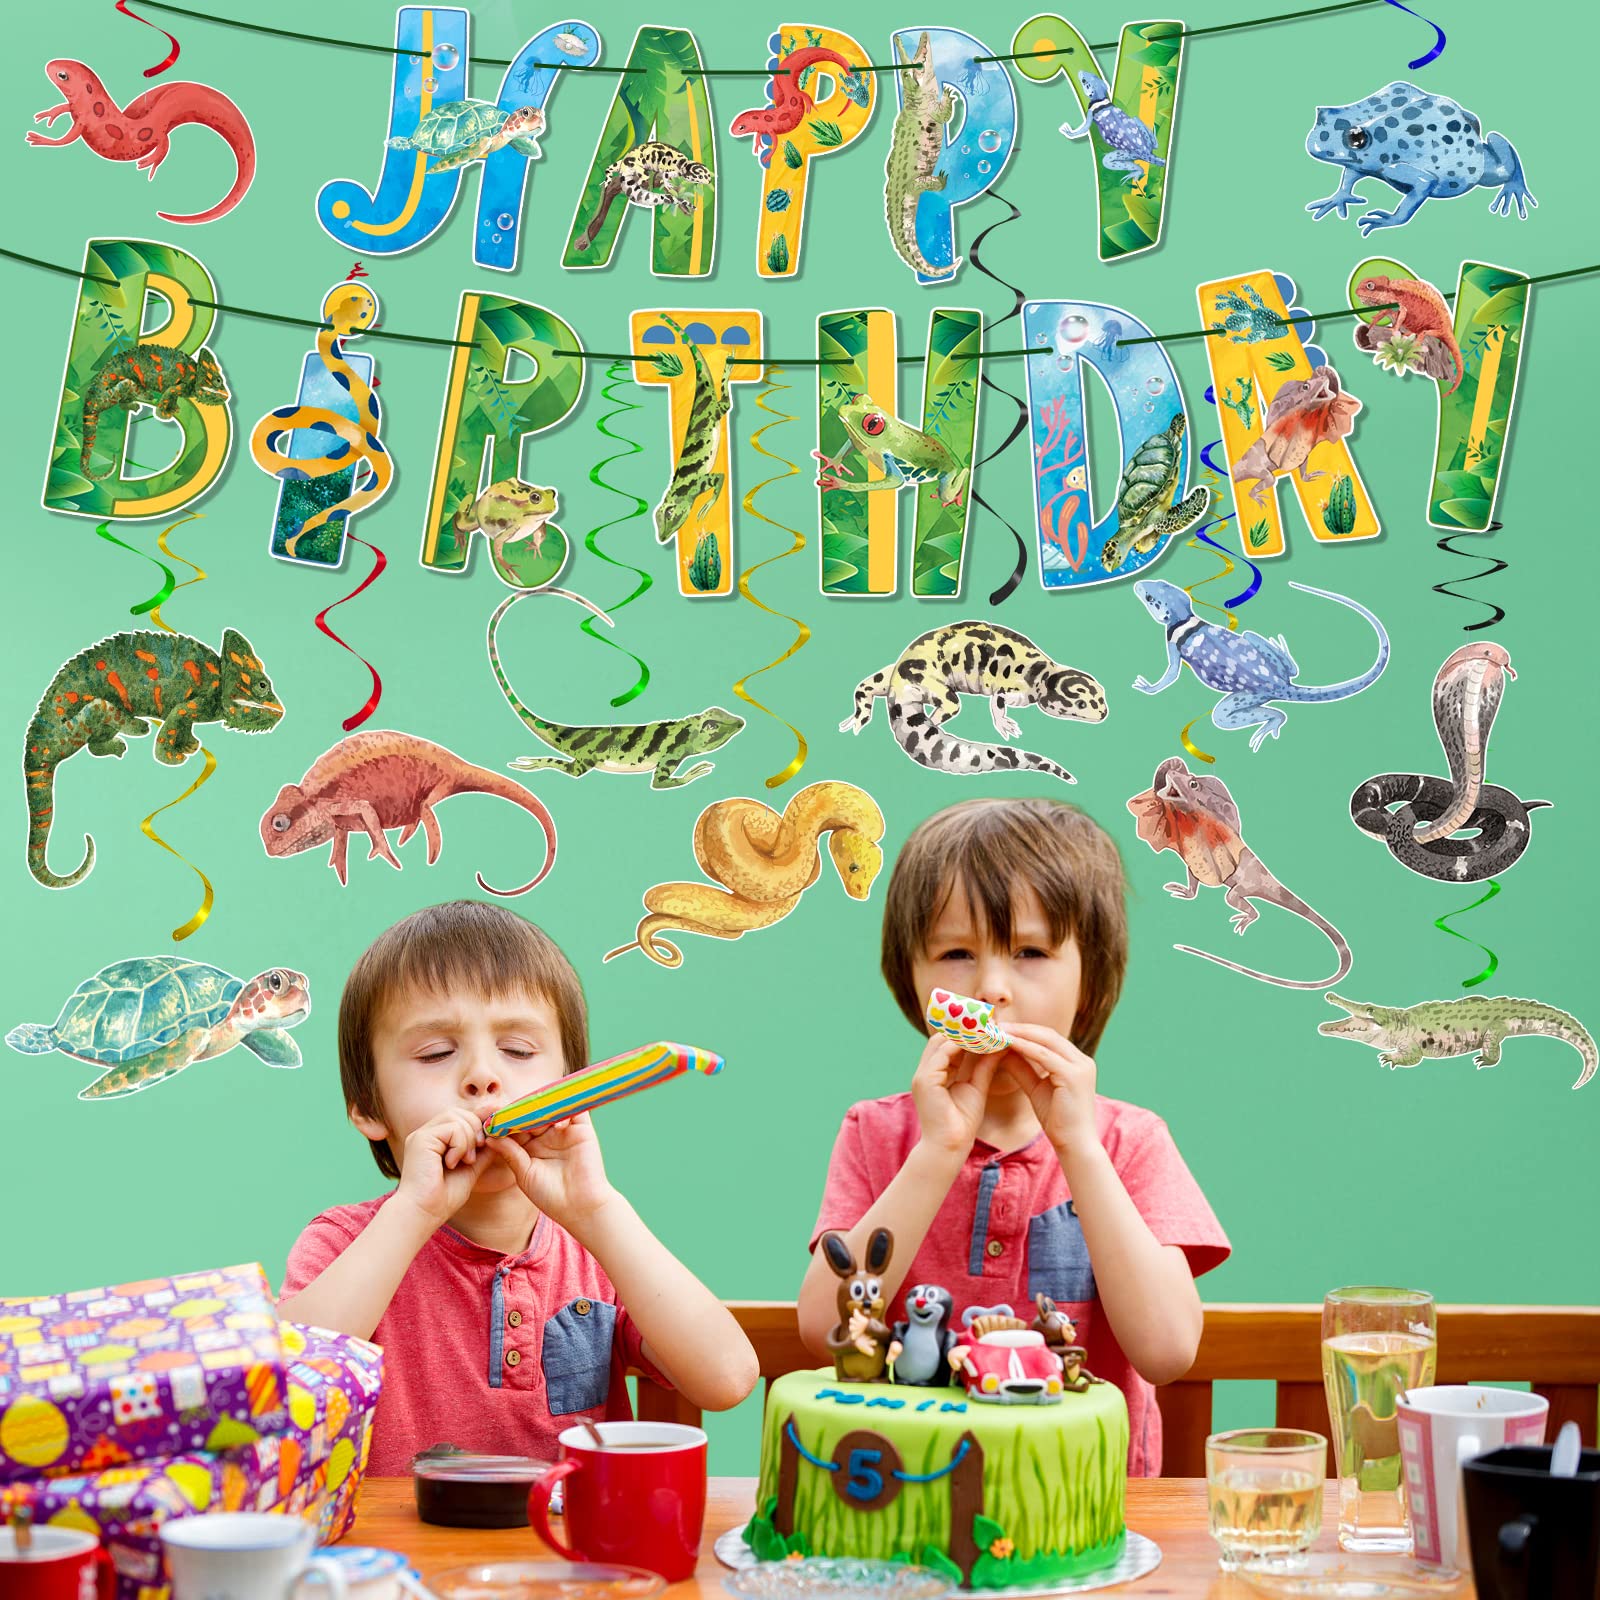 Reptile Birthday Party Supplies Reptile Swamp Happy Birthday Banner and 12 Pcs Reptile Hanging Swirls Safari Animals Lizard Snake Alligator Turtle Camping Wilderness Jungle Birthday Party Decorations